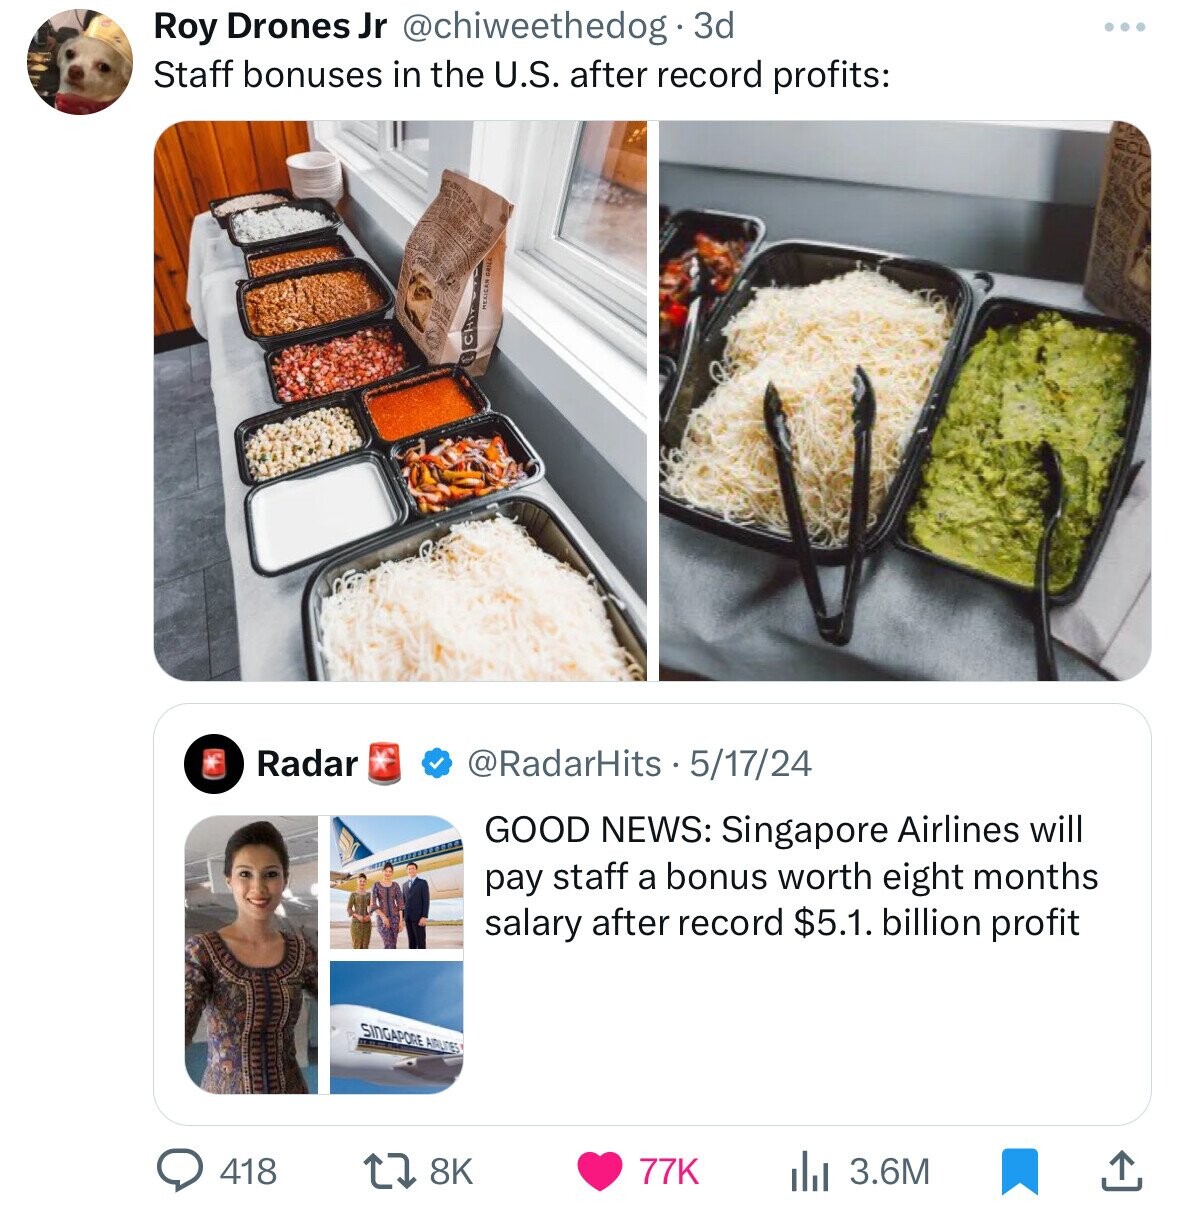 jasmine rice - Roy Drones Jr . 3d Staff bonuses in the U.S. after record profits ... Radar 51724 Good News Singapore Airlines will pay staff a bonus worth eight months salary after record $5.1. billion profit Singapore Airlines 418 77K Ill 3.6M